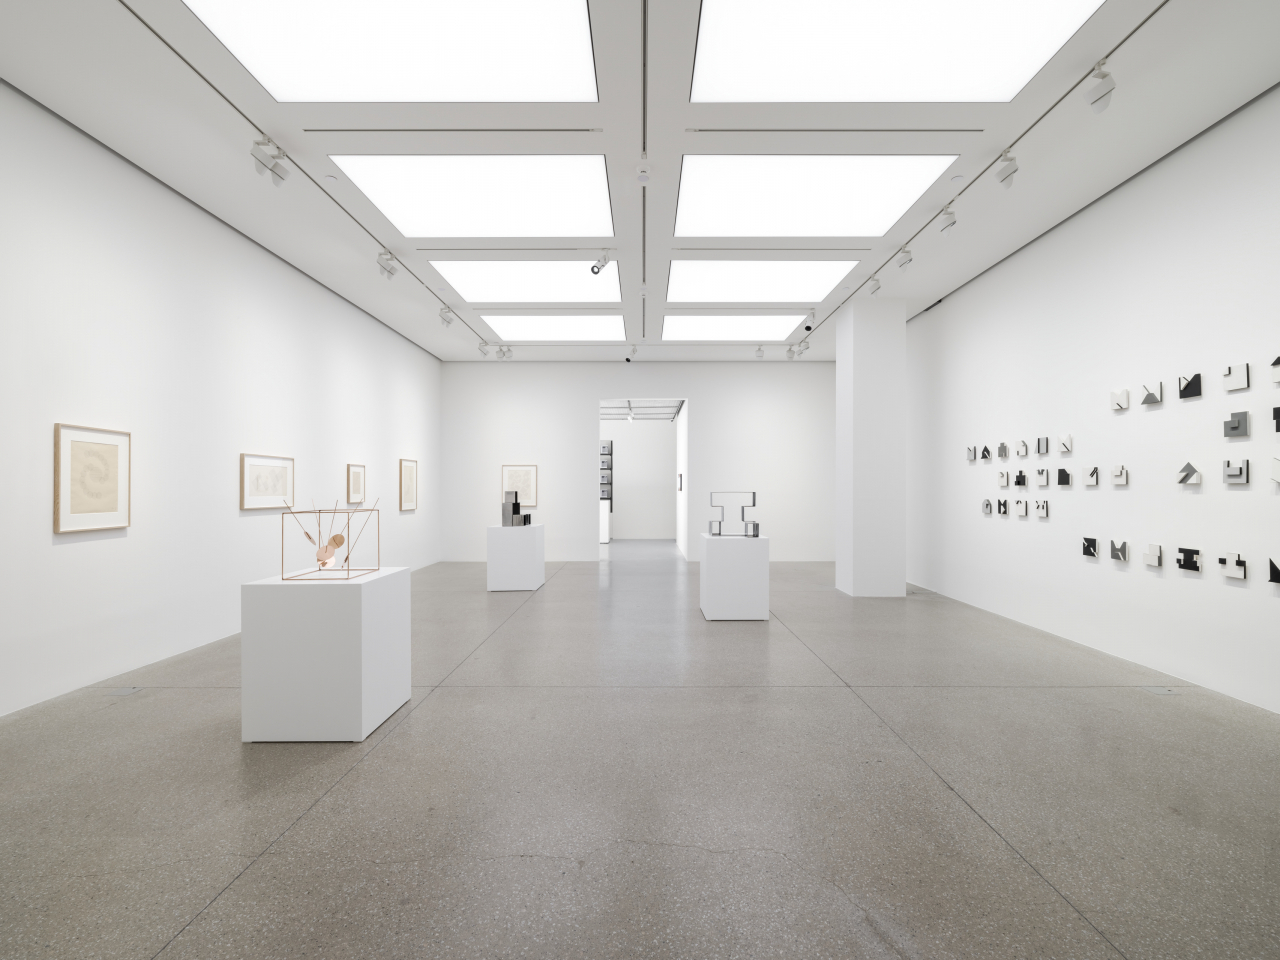 An installation view of the exhibition 